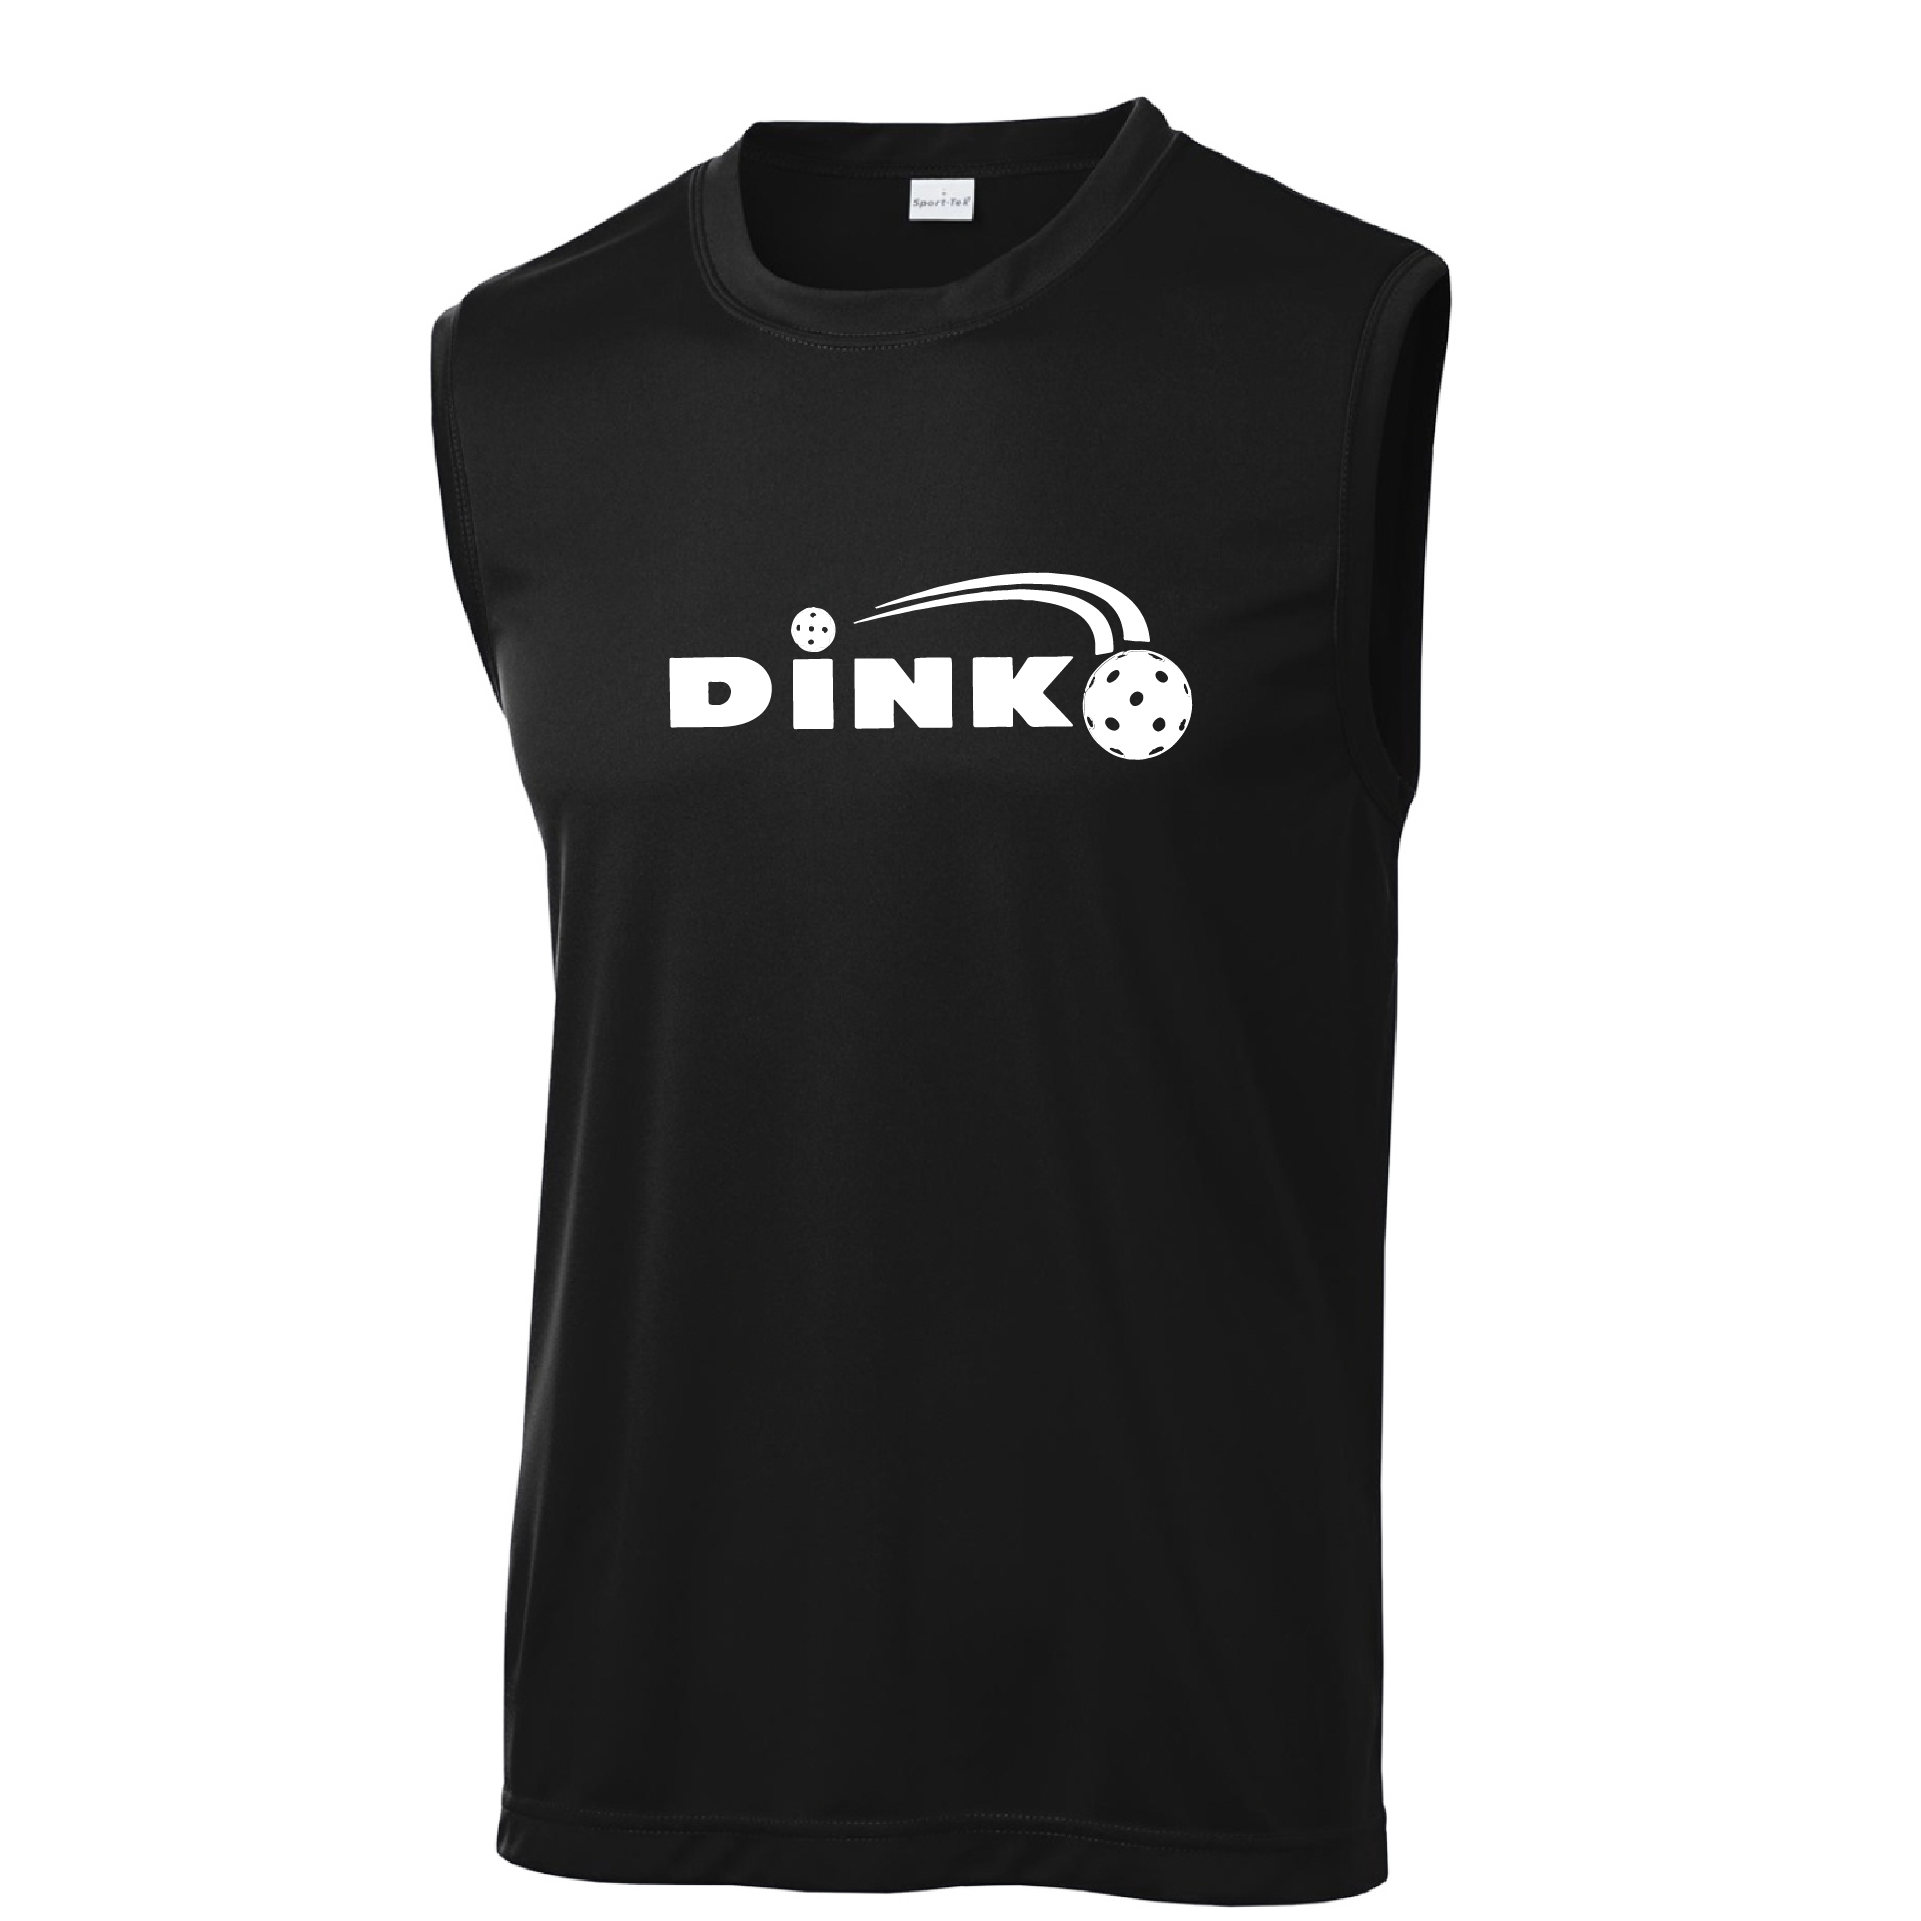 Pickleball Design: Dink  Men's Styles: Sleeveless (SL)  Shirts are lightweight, roomy and highly breathable. These moisture-wicking shirts are designed for athletic performance. They feature PosiCharge technology to lock in color and prevent logos from fading. Removable tag and set-in sleeves for comfort.